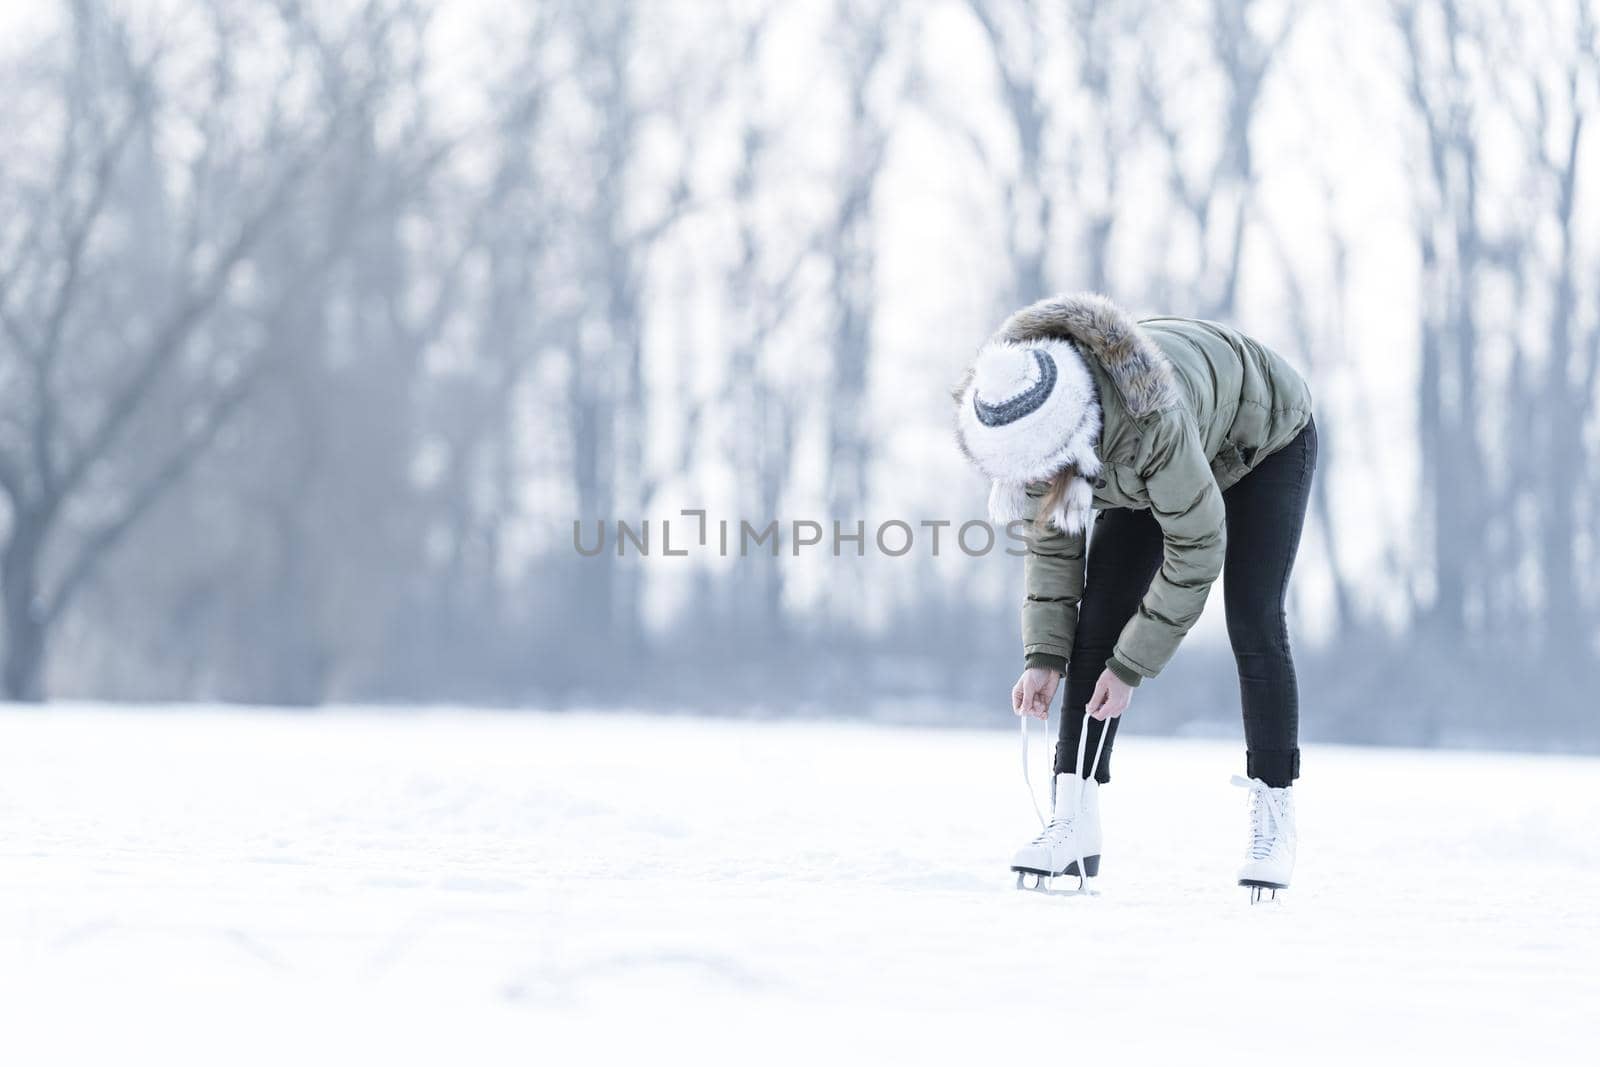 tying the laces of winter skates on a frozen lake, ice skating by Edophoto